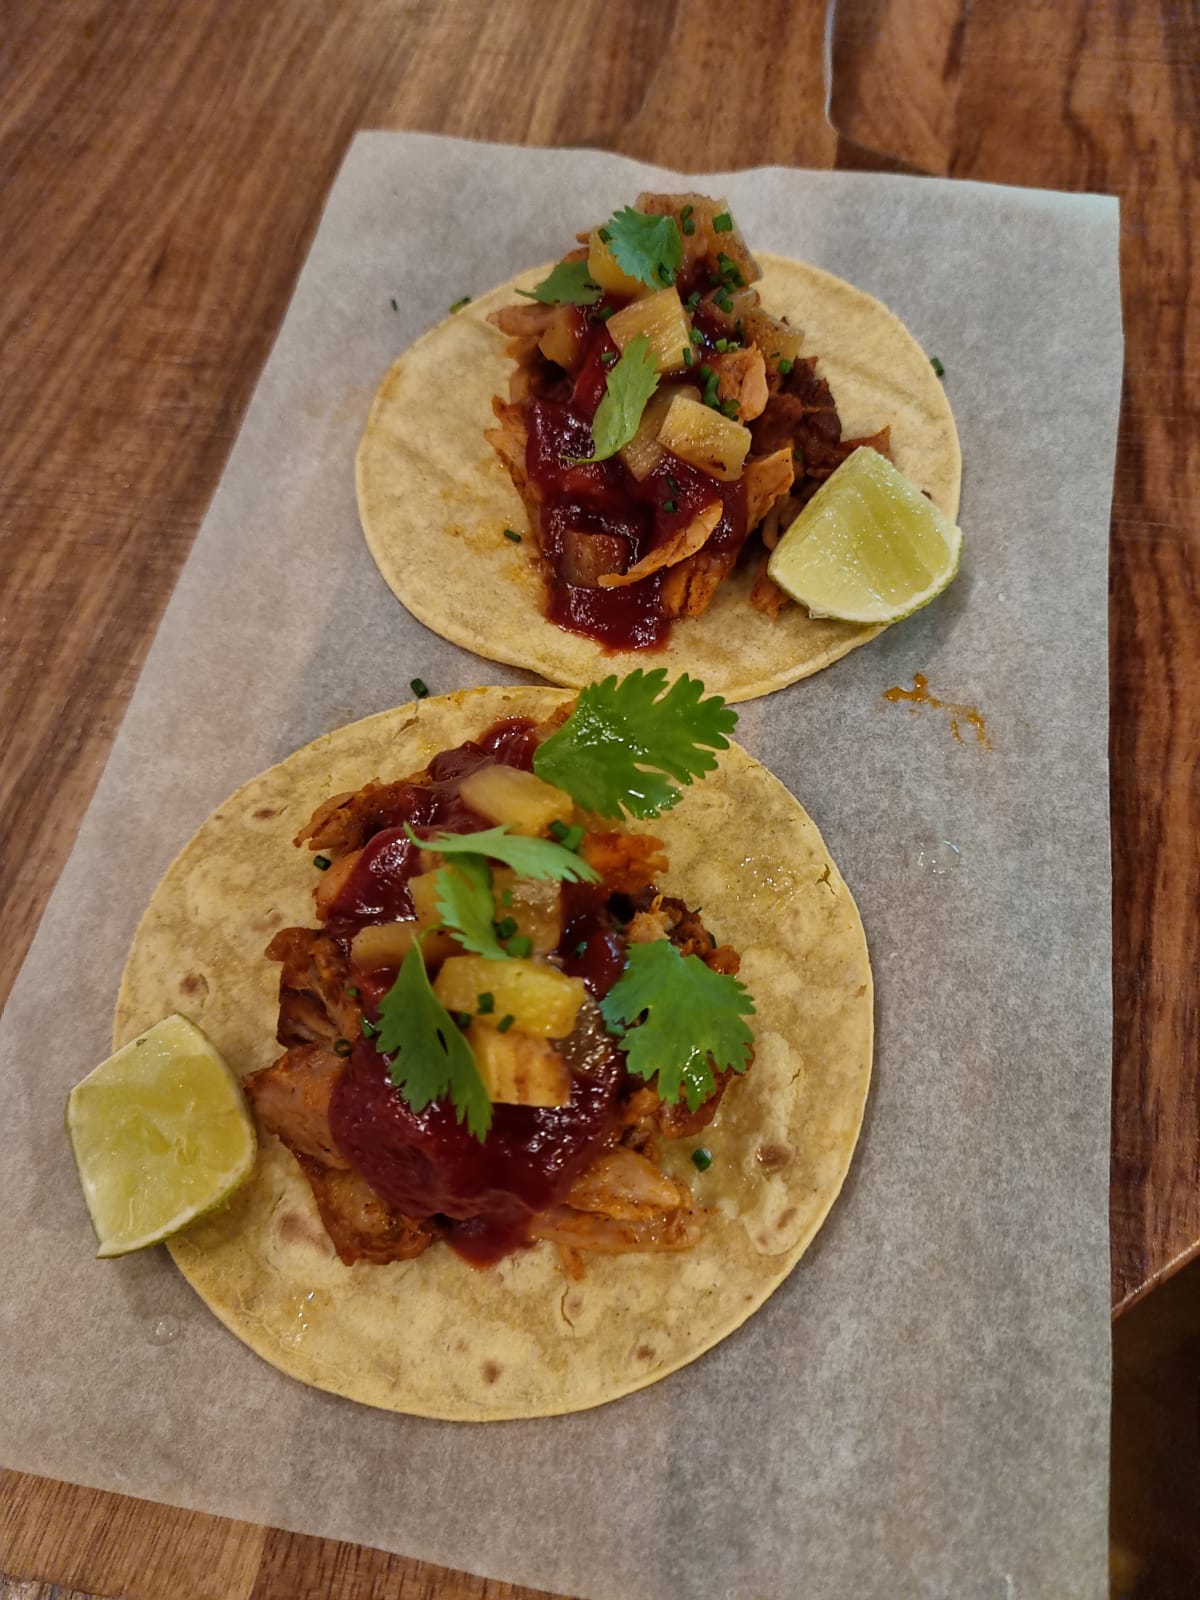 Tacos with pork, grilled pineapple and barbecue sauce